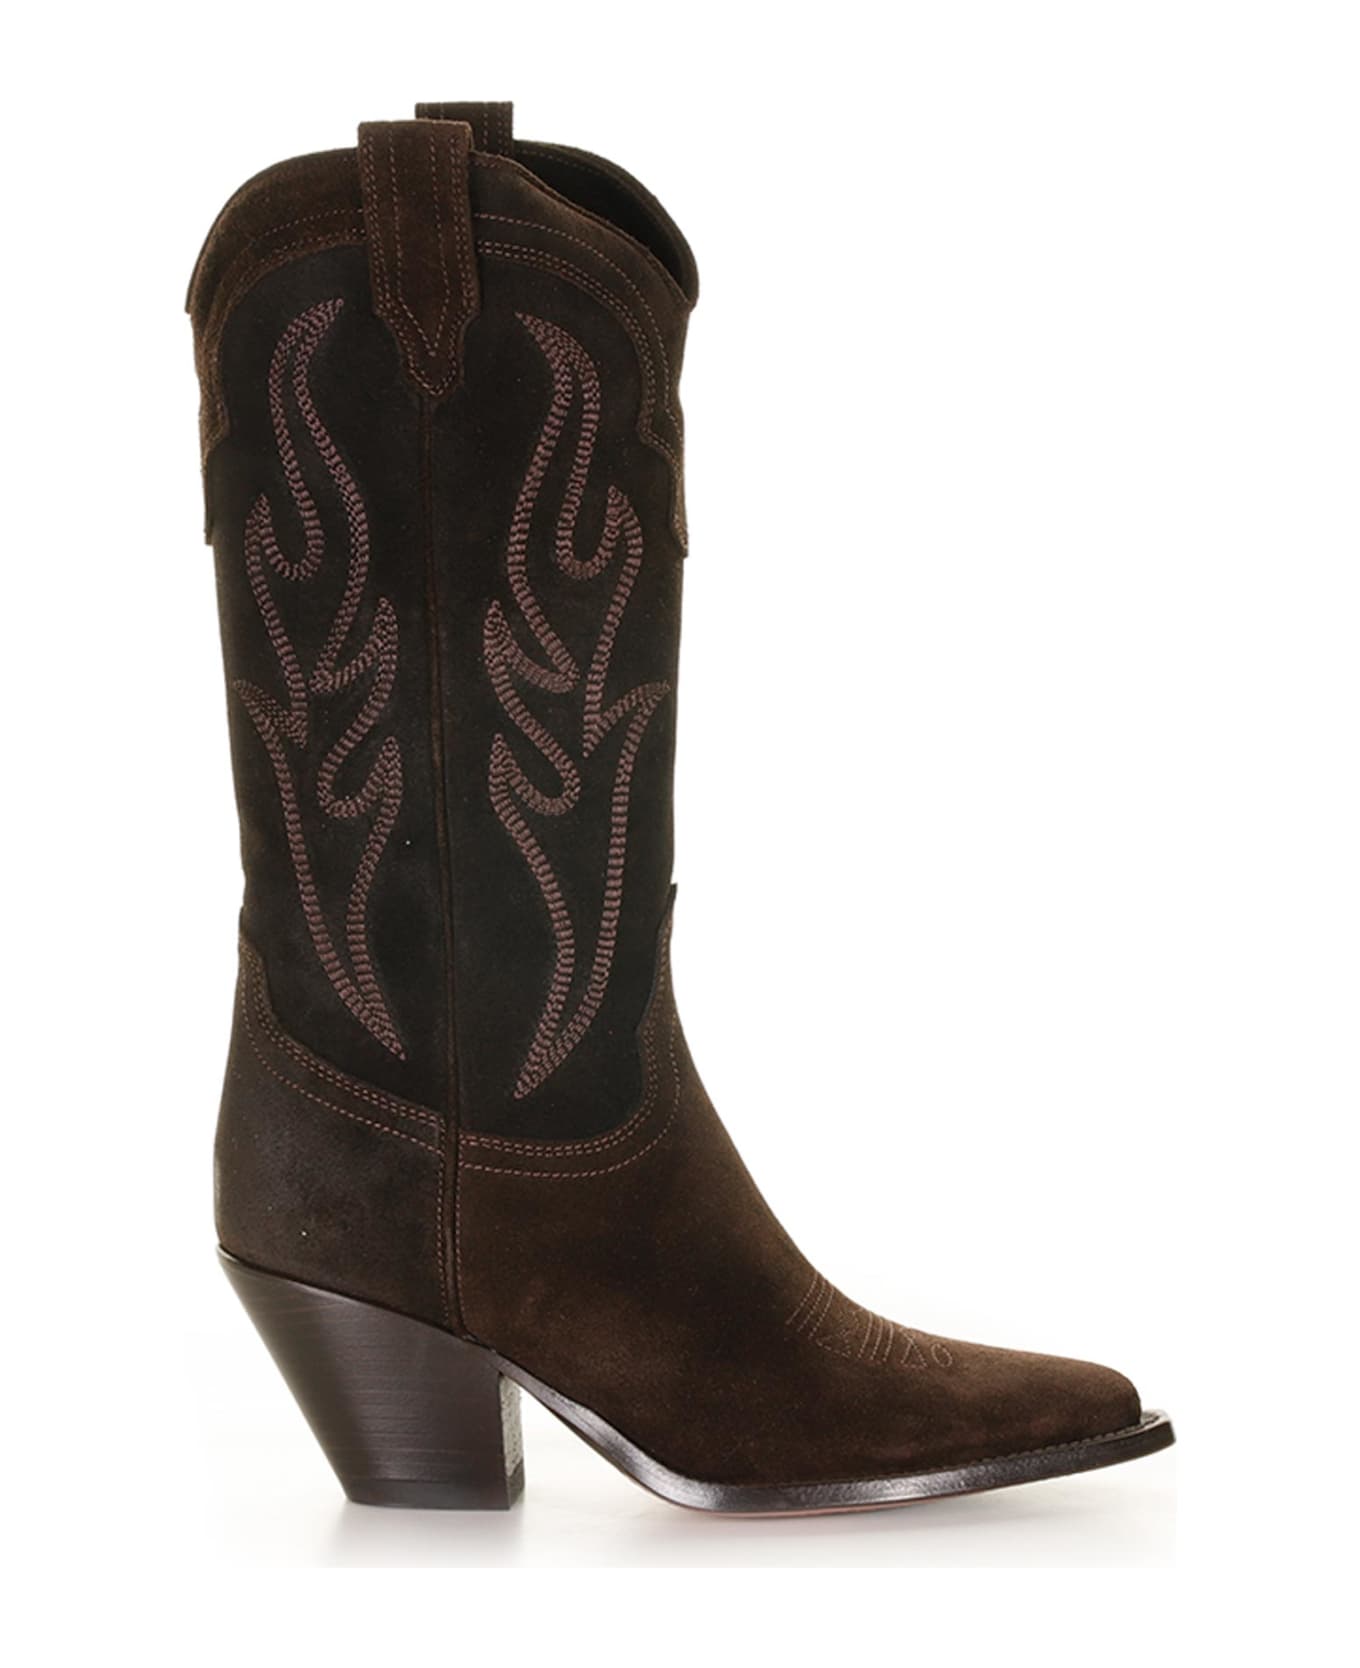 Sonora Santa Fe Cowboy Style Texan Boot In Embroidered Suede - BROWN ブーツ